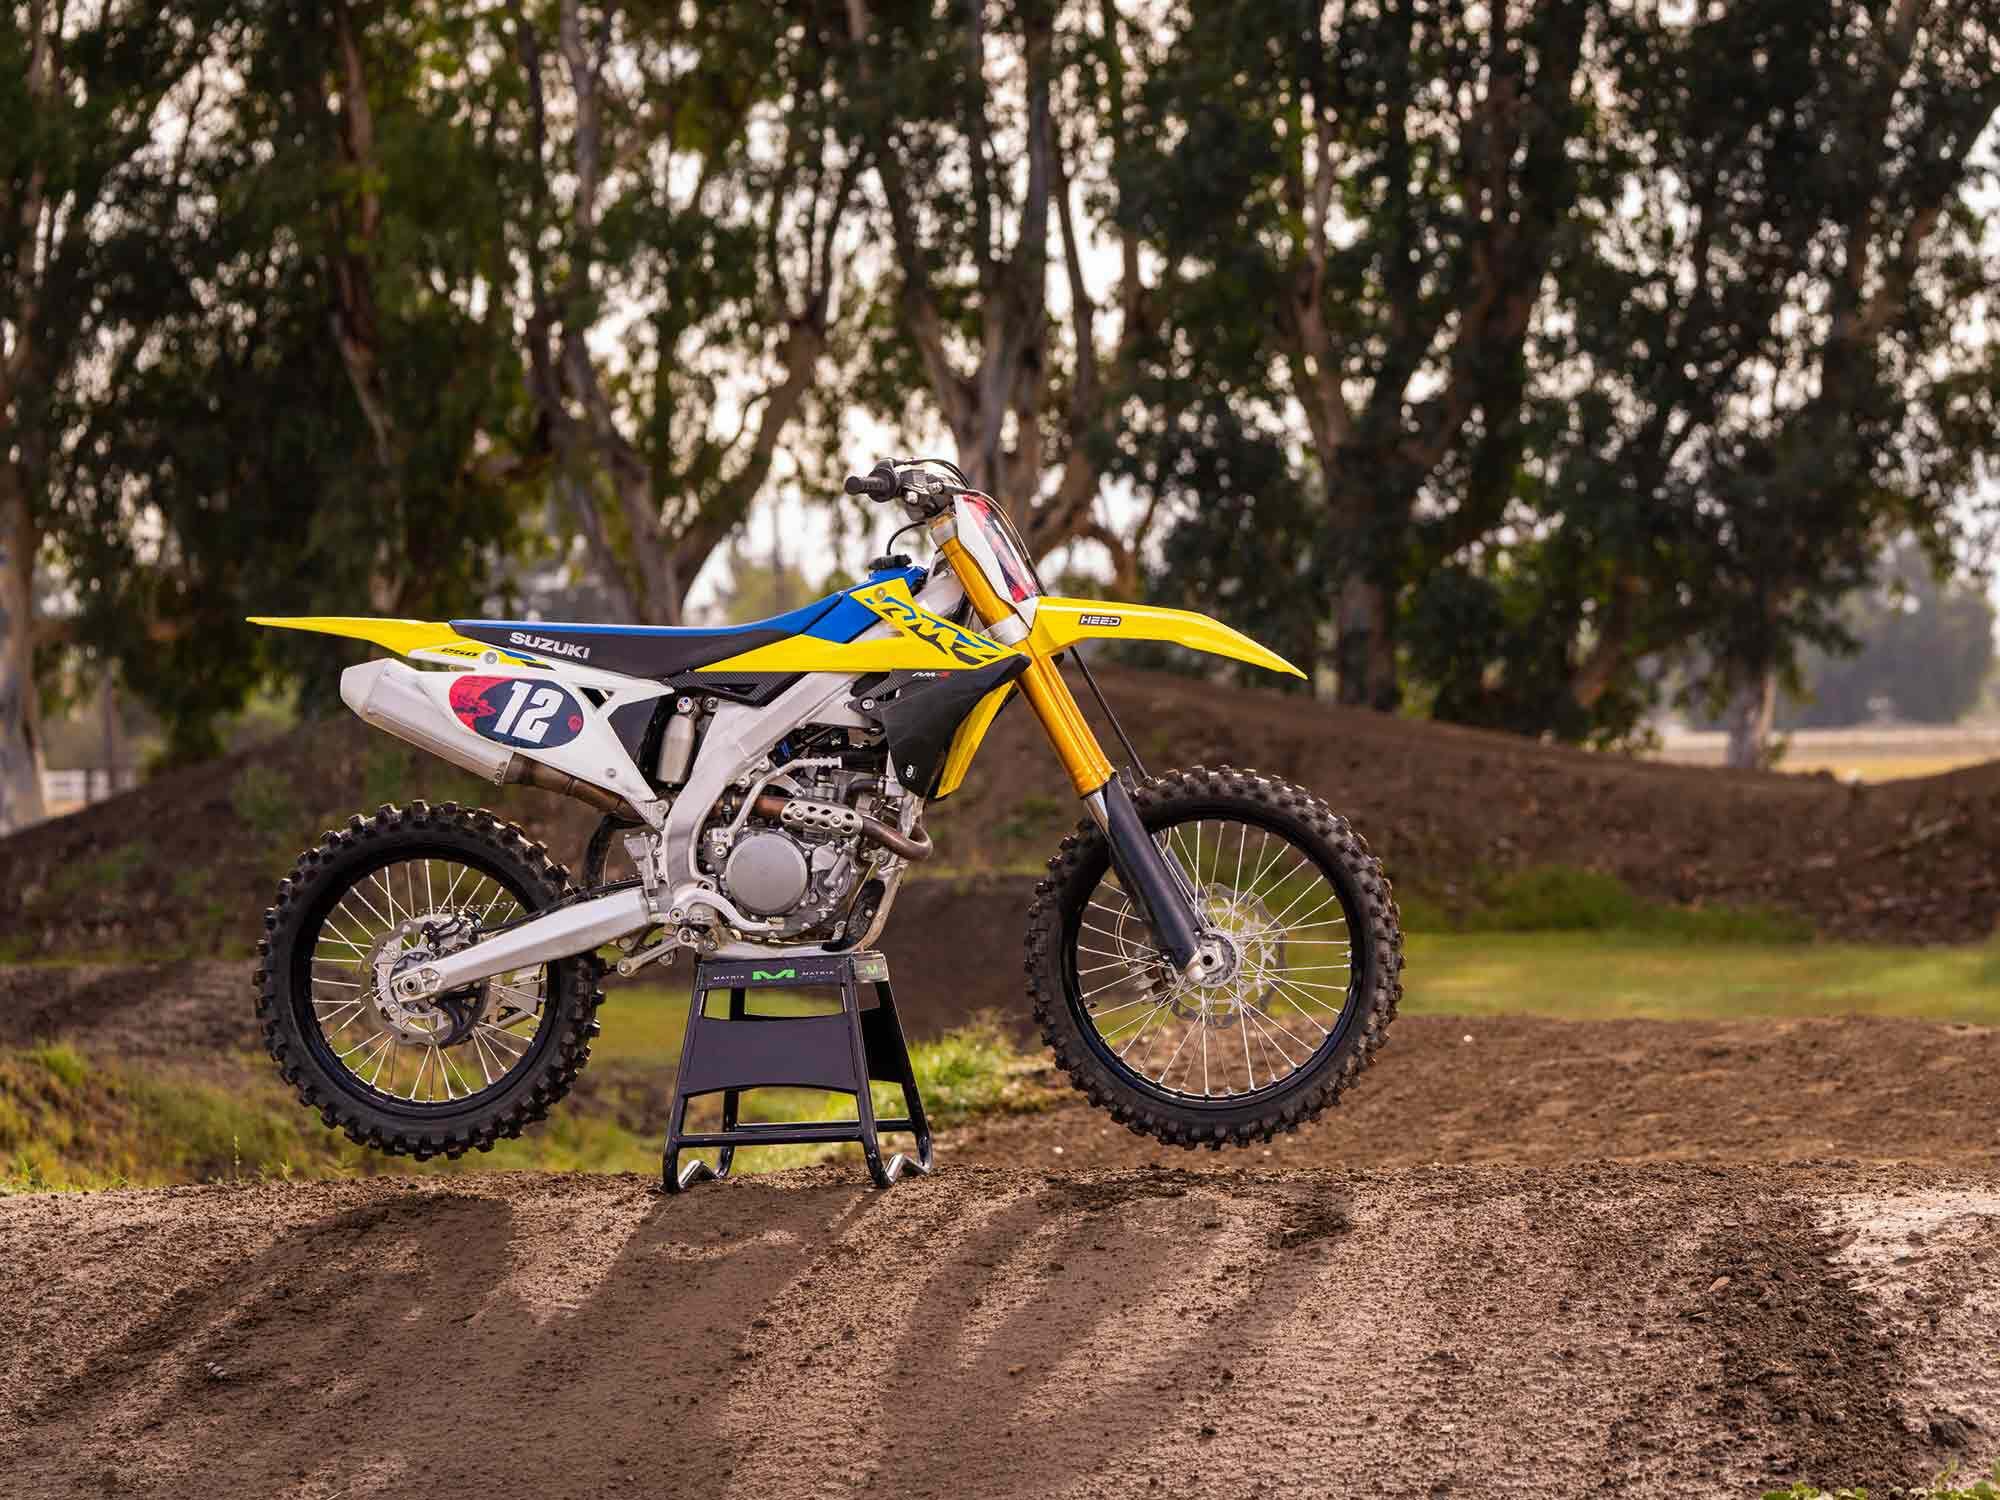 It isn’t the fastest dirt 250 out there, but as usual, Suzuki rides the fine line between performance and value with its RM-Z250.